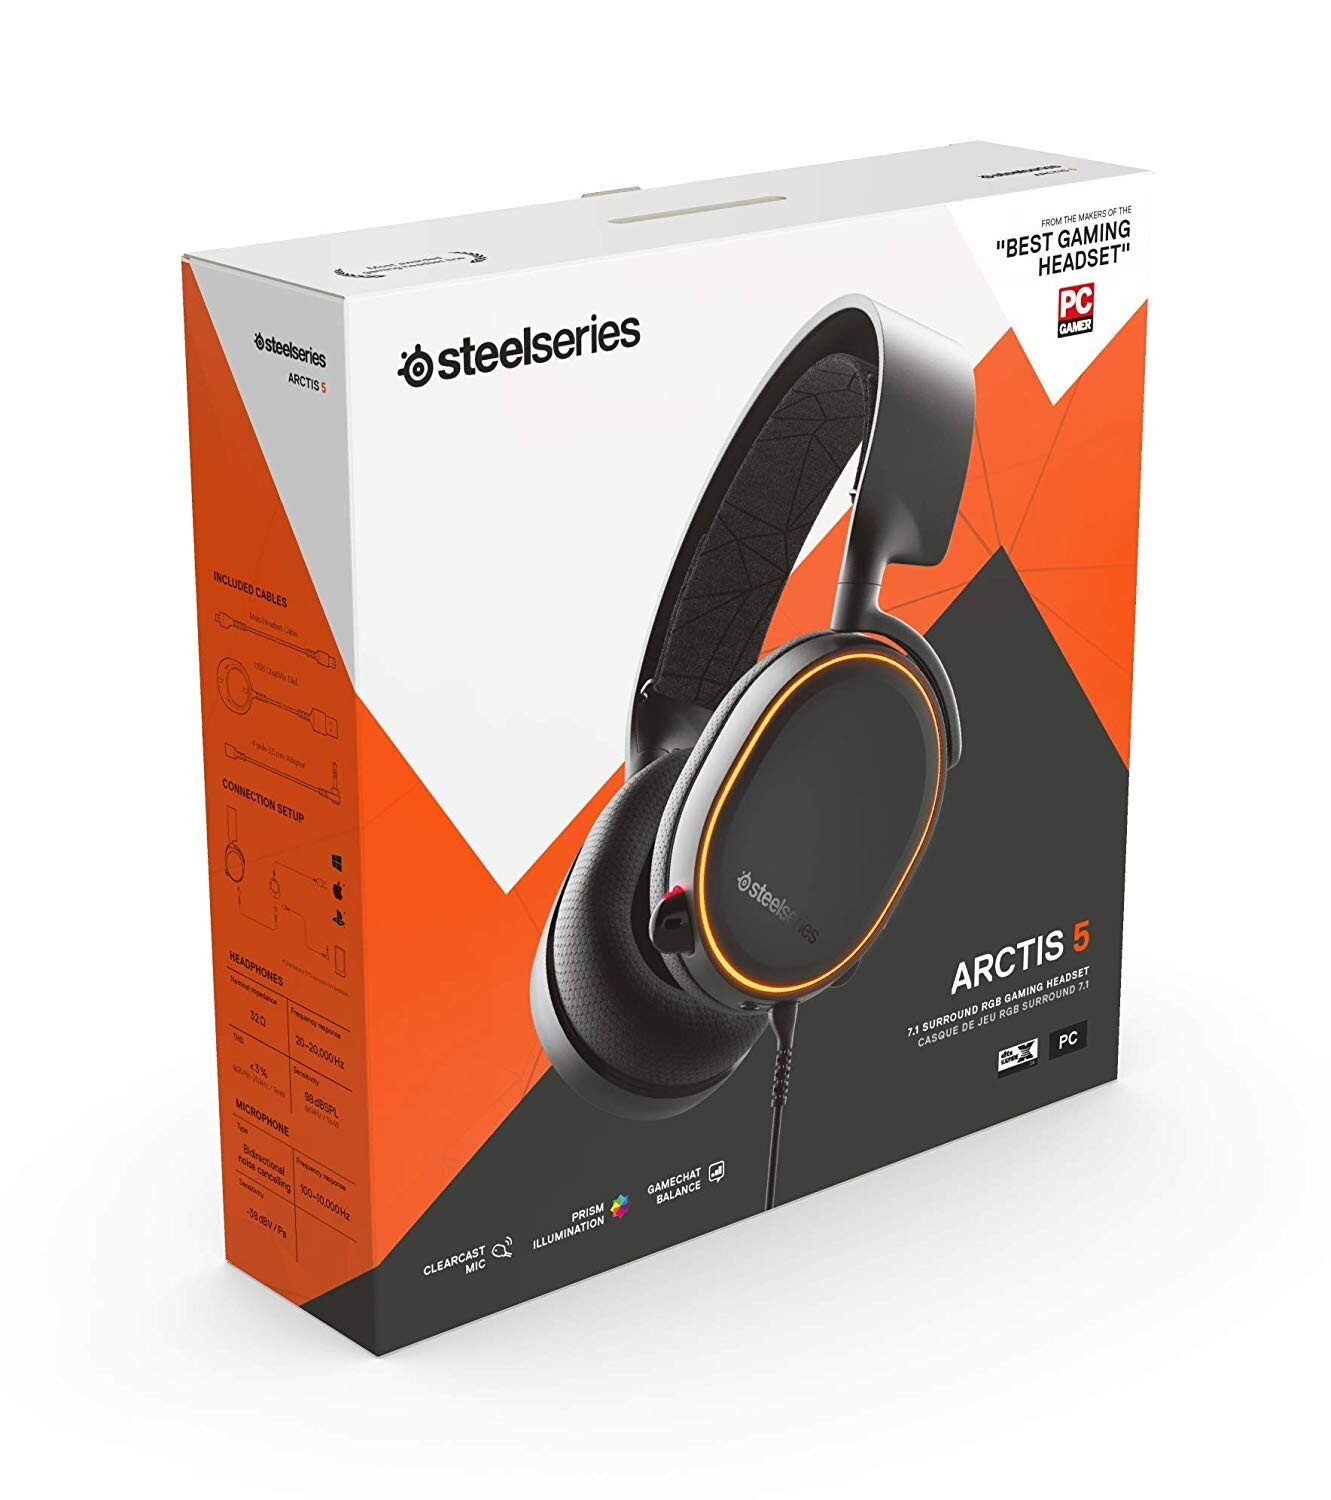 steelseries arctis 5 gaming headset 2019 edition